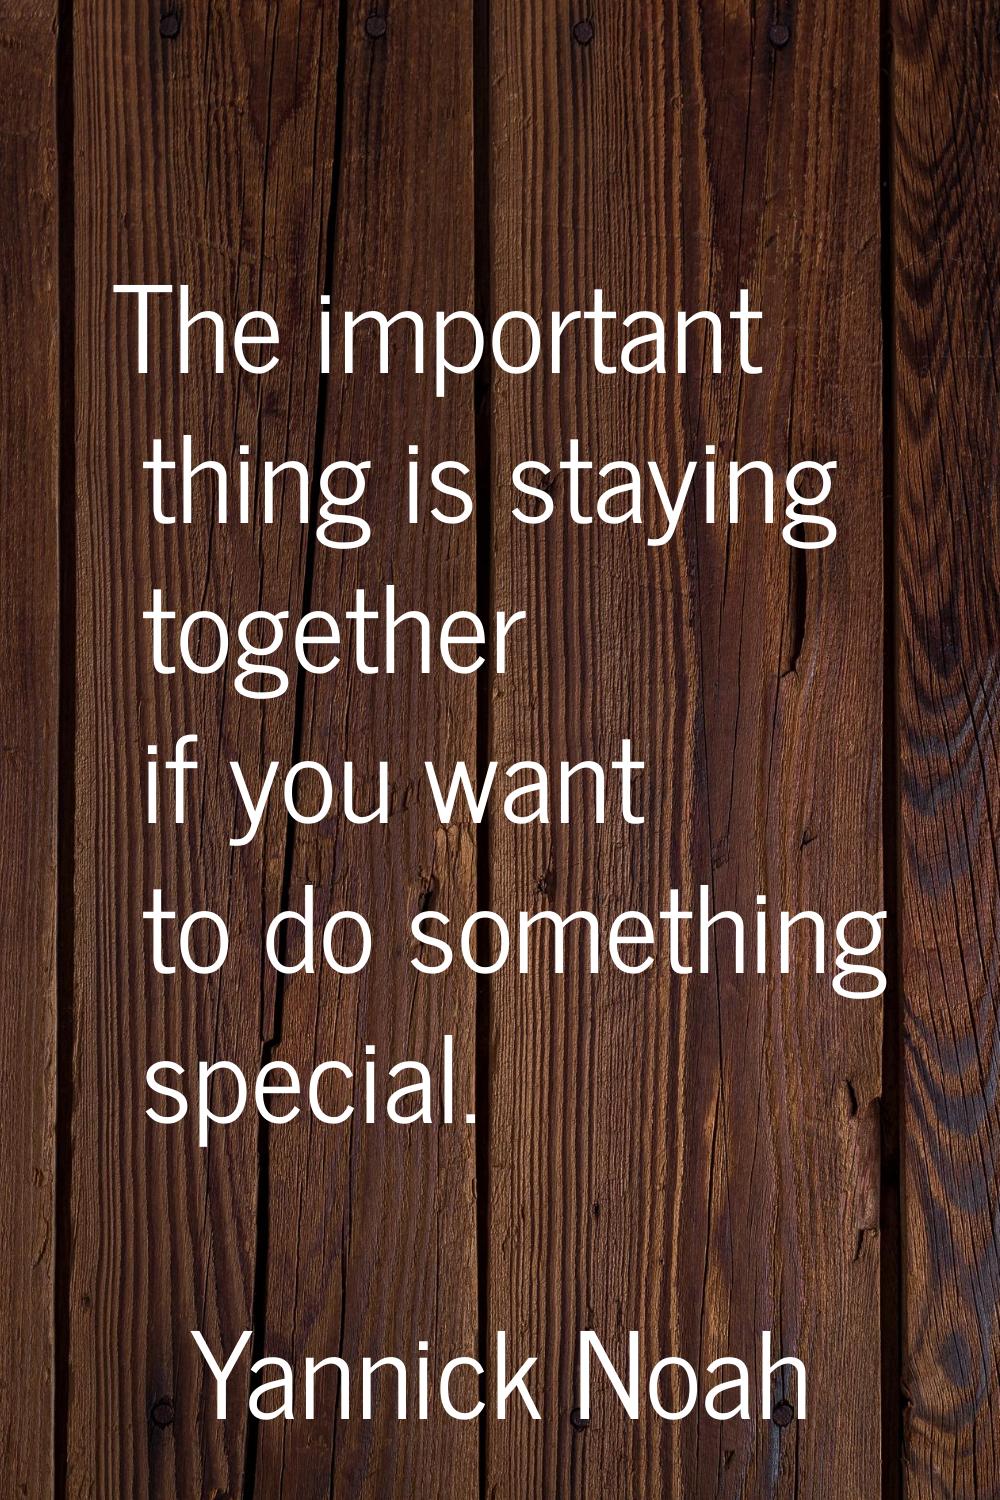 The important thing is staying together if you want to do something special.